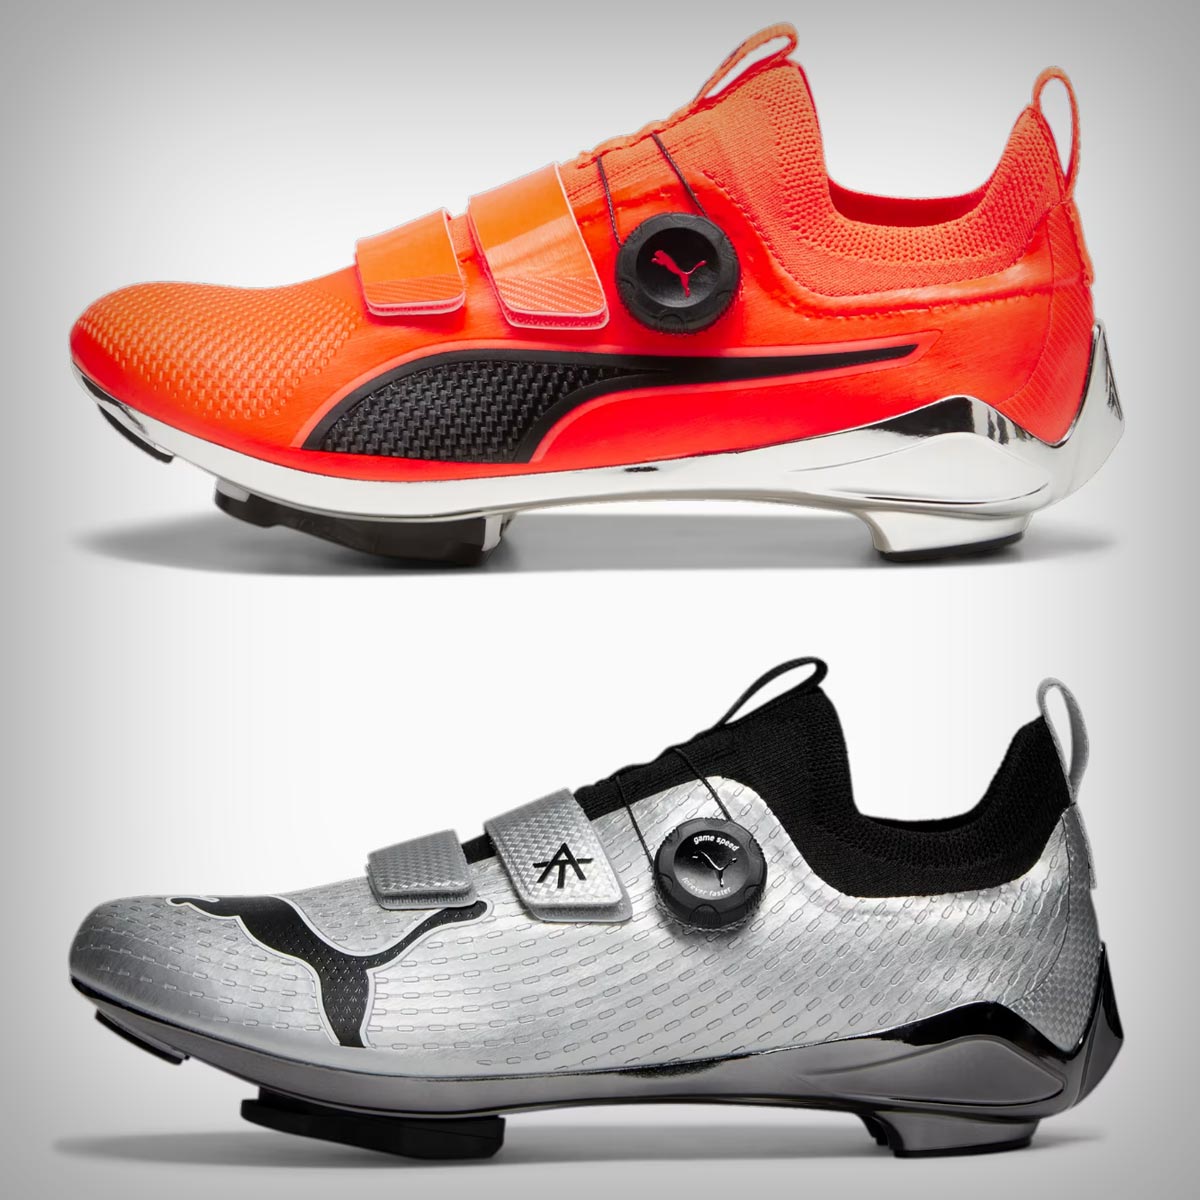 Puma PWR Spin, the brand's new shoes for indoor cycling